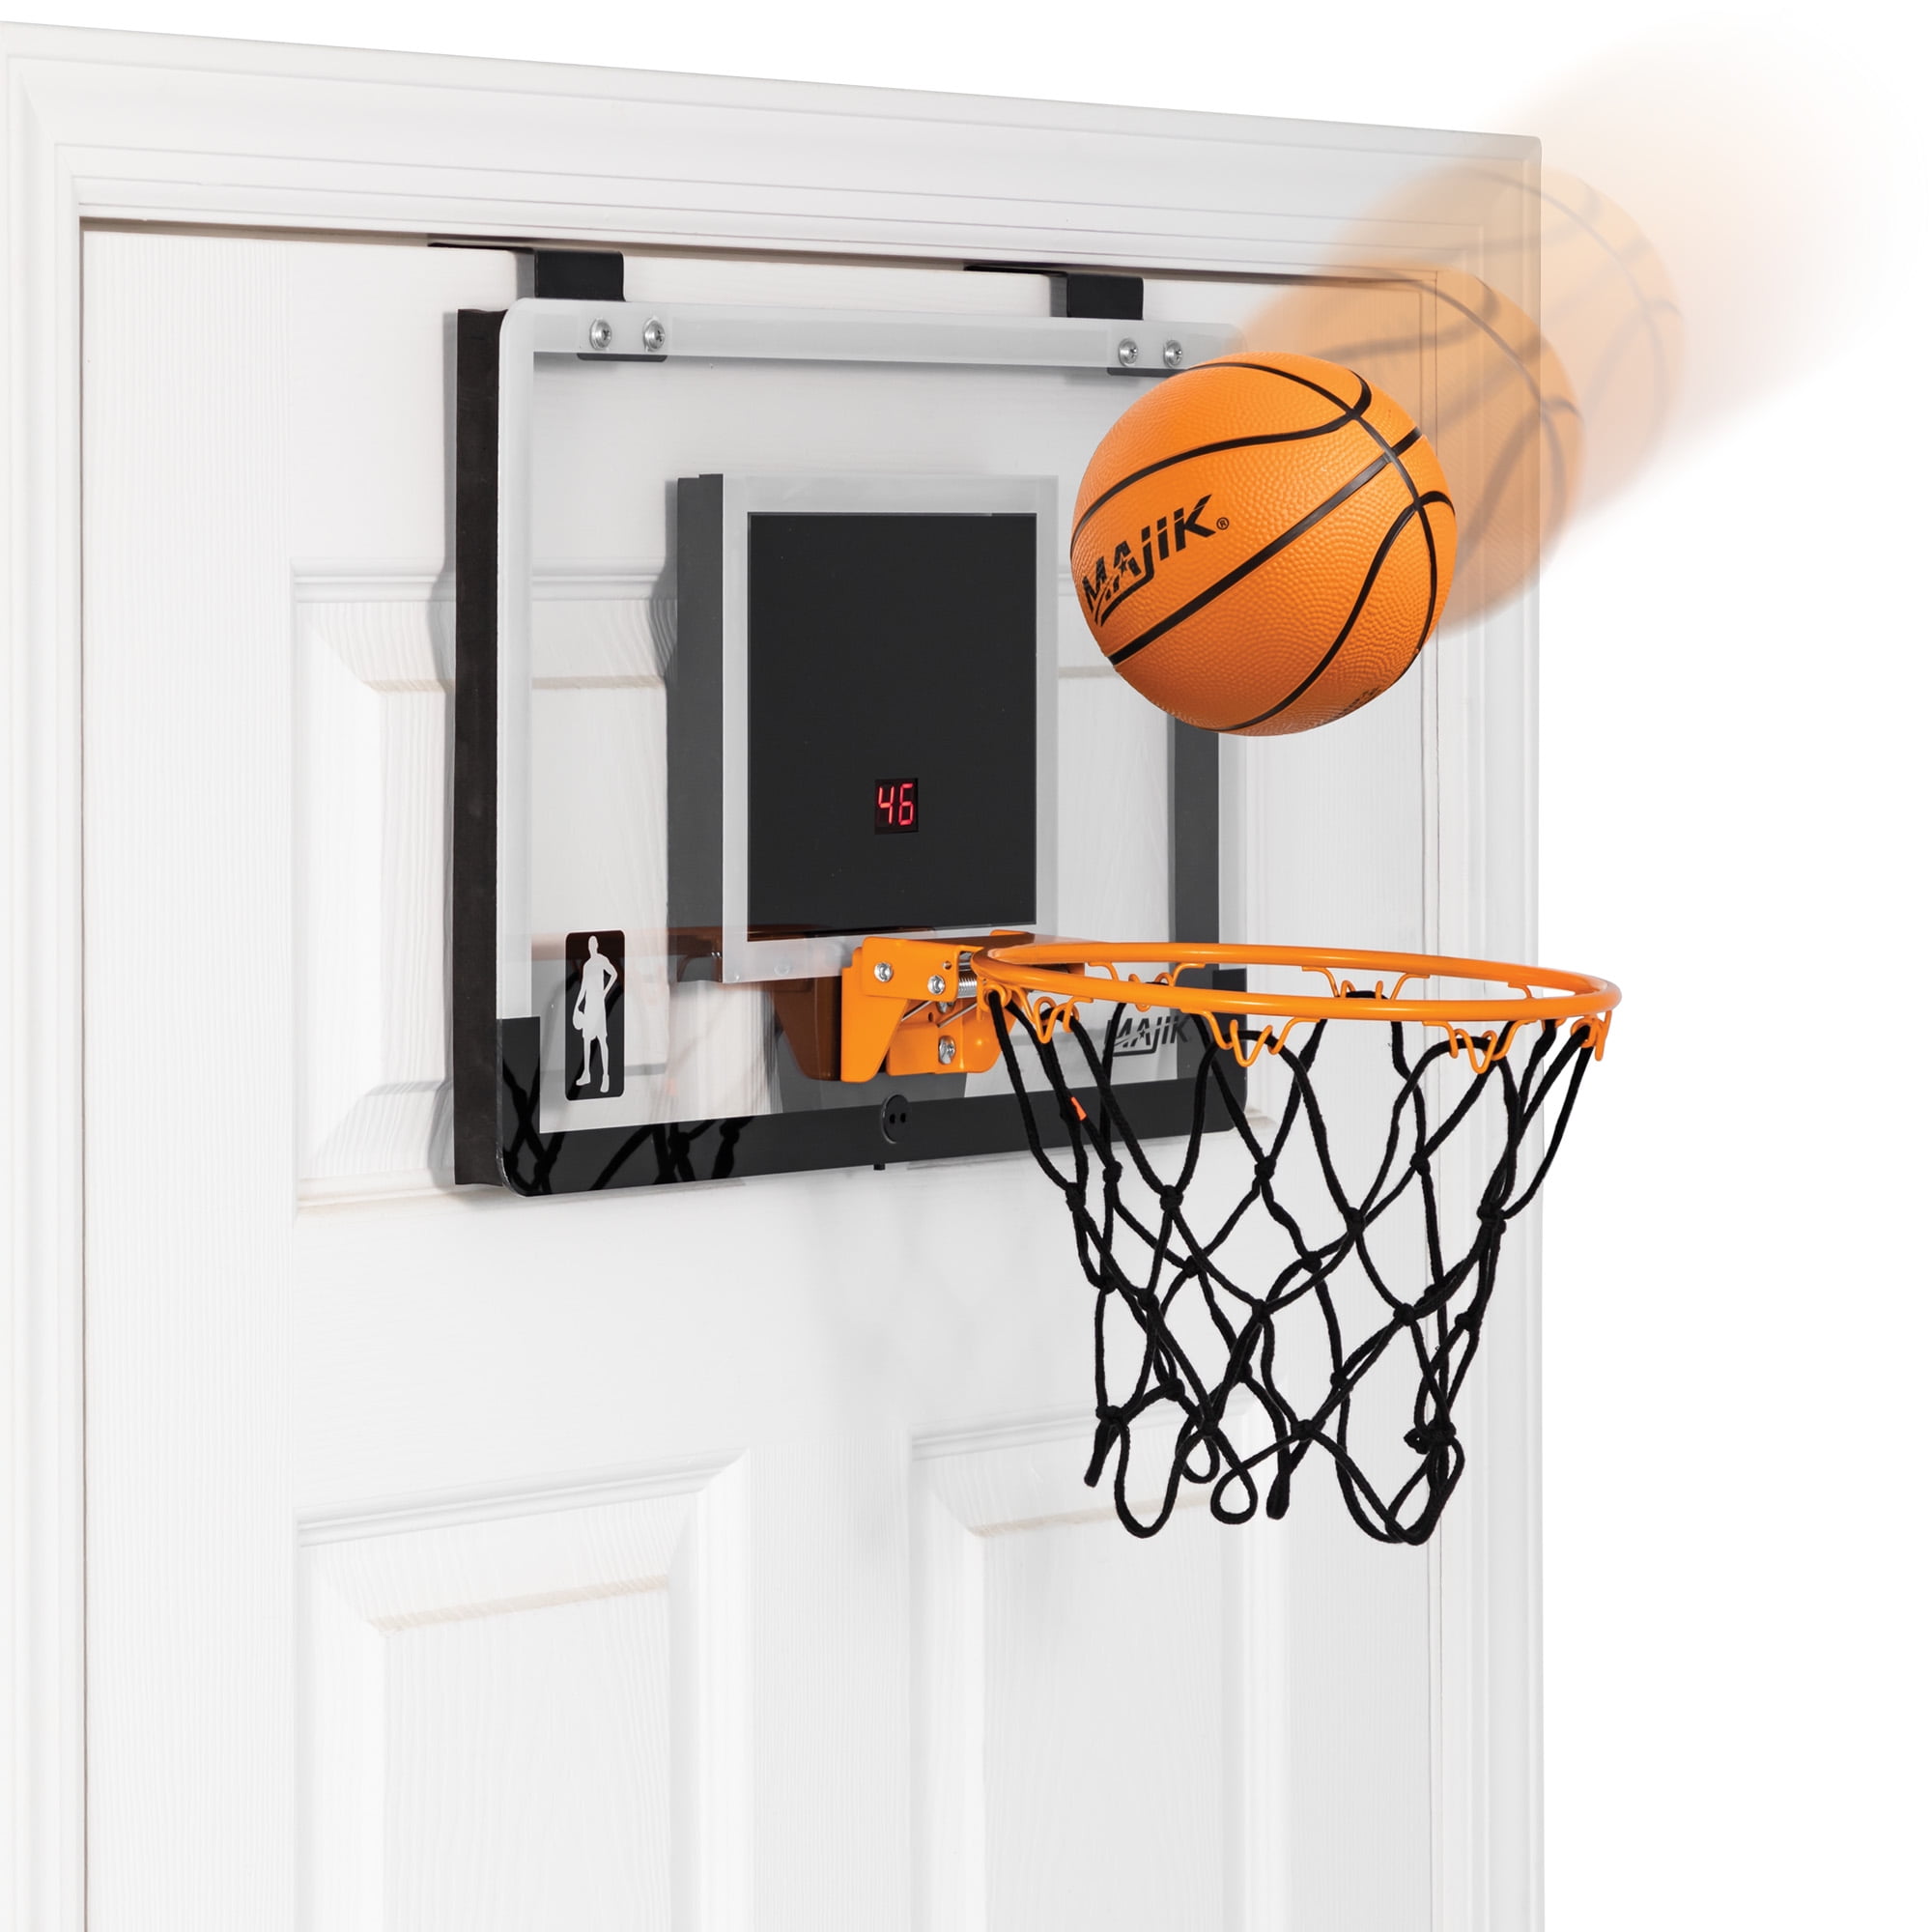 16 Magic Shot Mini Basketball Hoop Set With Ball and Pump for sale online 